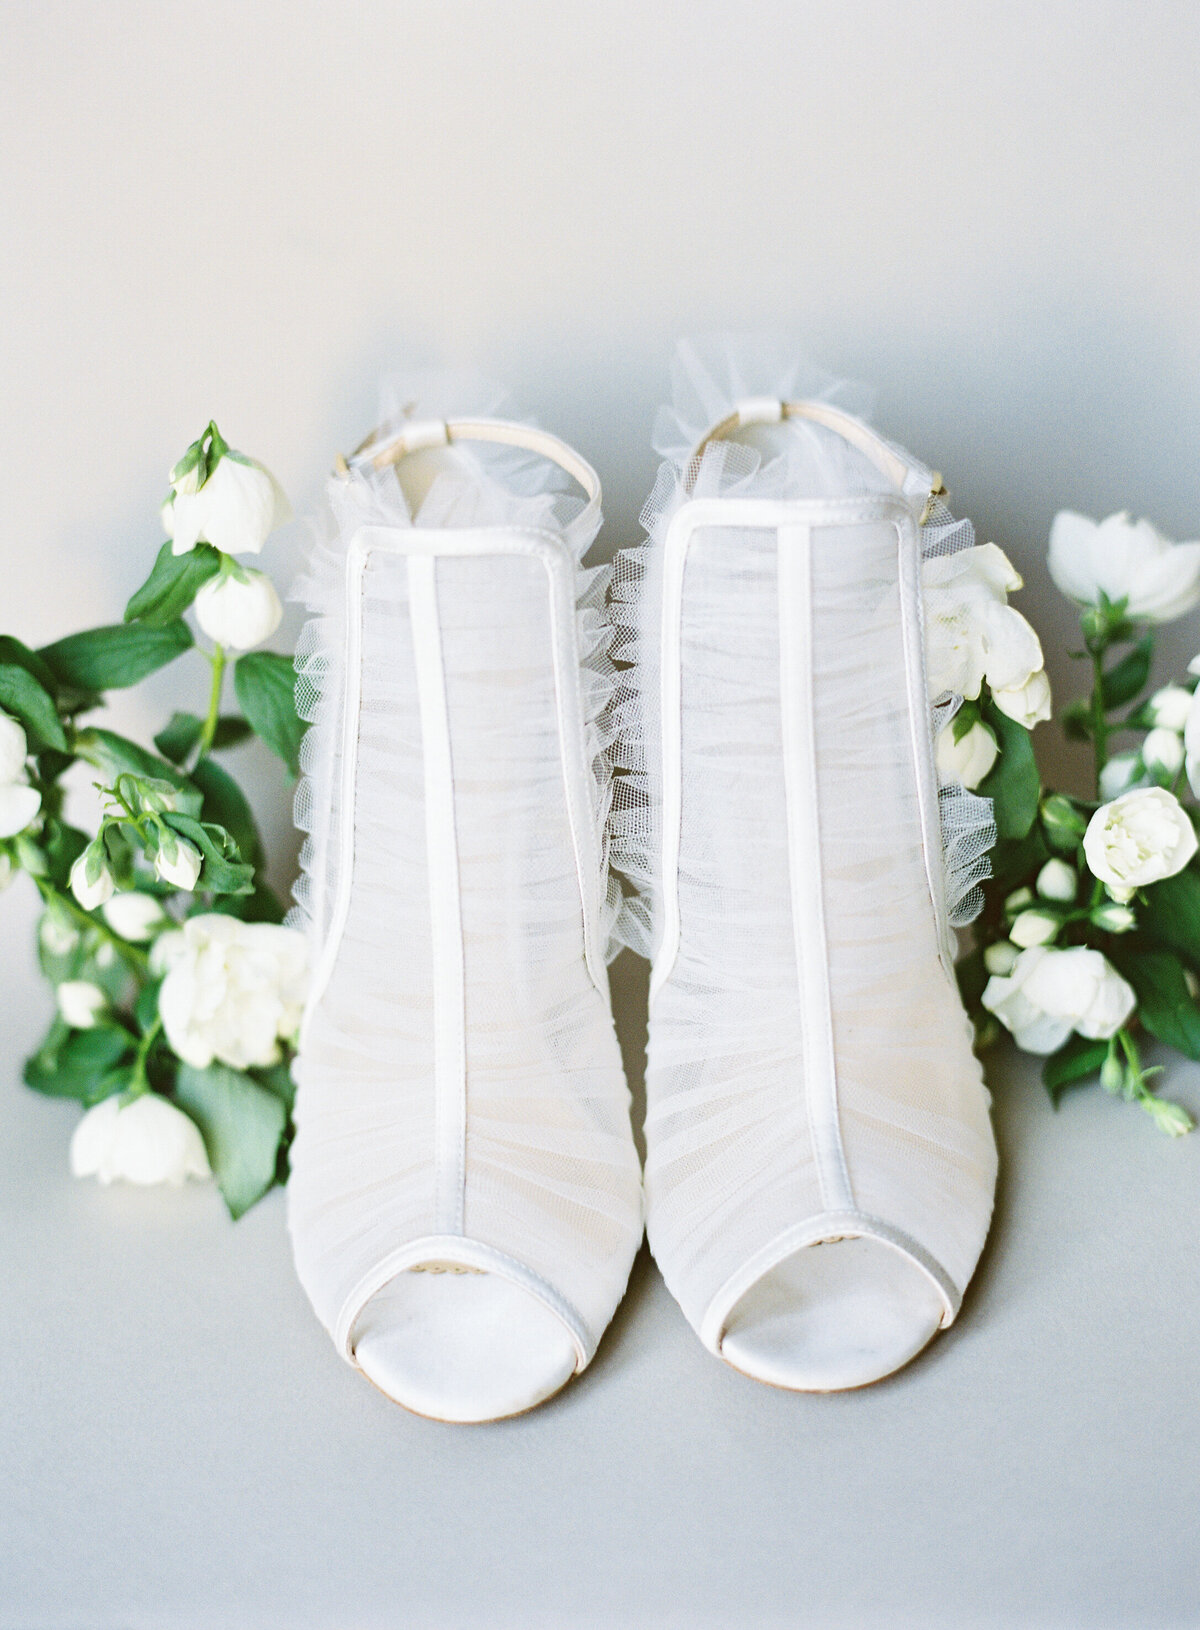 Wedding shoes photographed at the amazing San Francisco Wedding Venue Filoli, by Bay Area Wedding Photographers Pinnel Photography